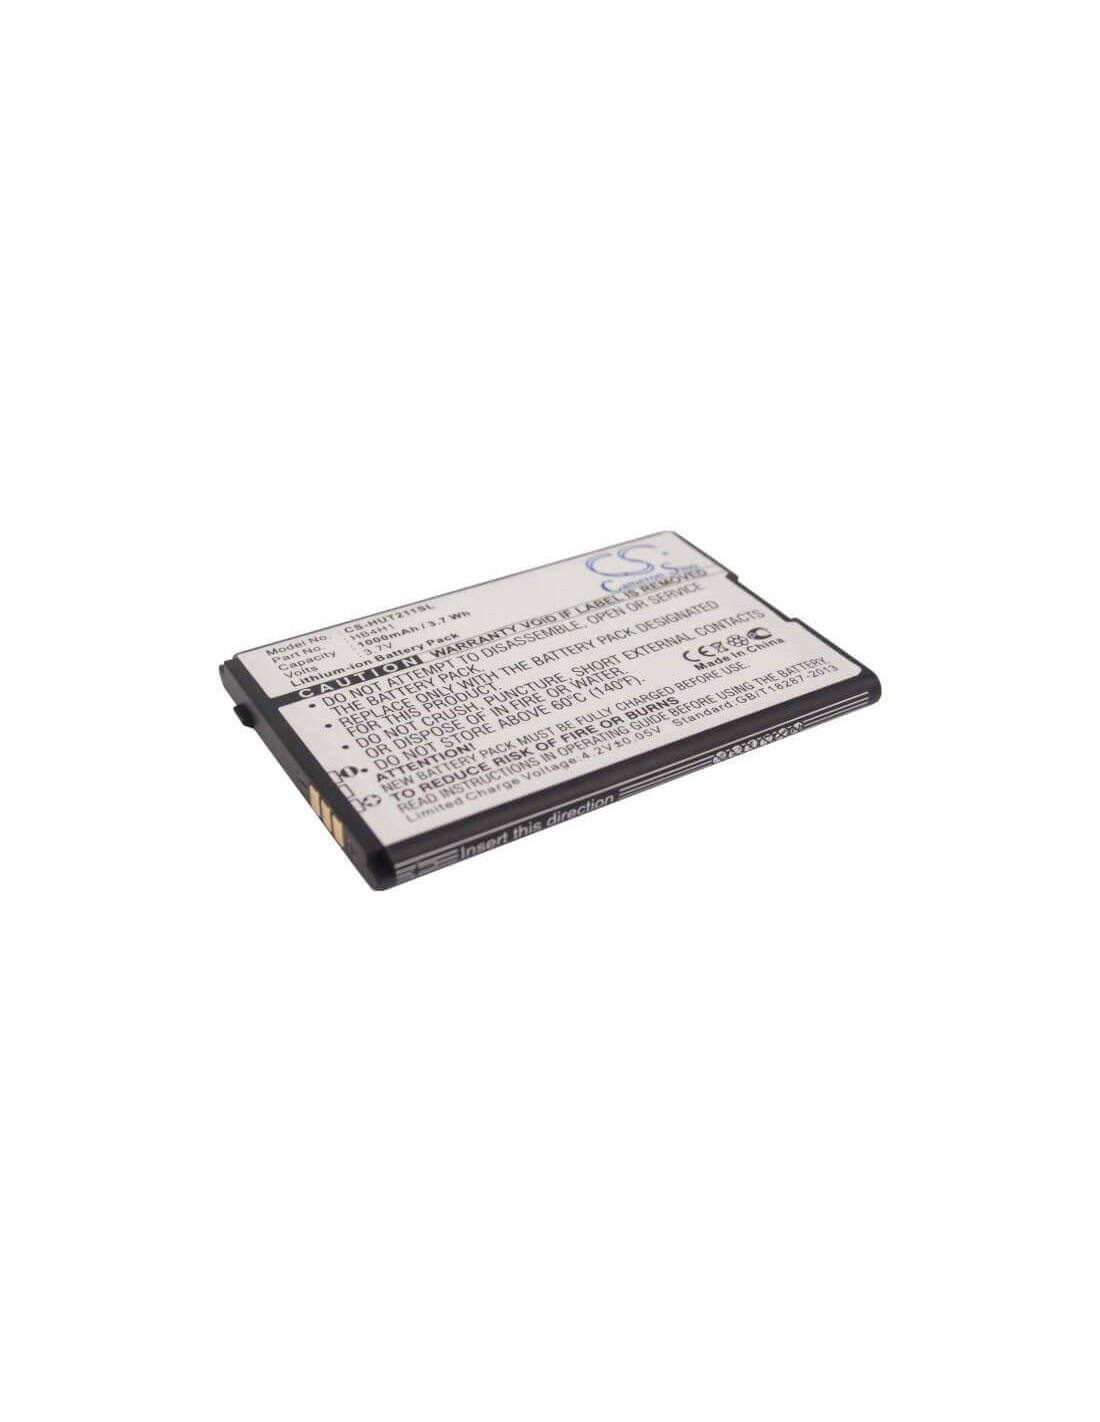 Battery for Huawei T2211, T2251, T1600 3.7V, 1000mAh - 3.70Wh